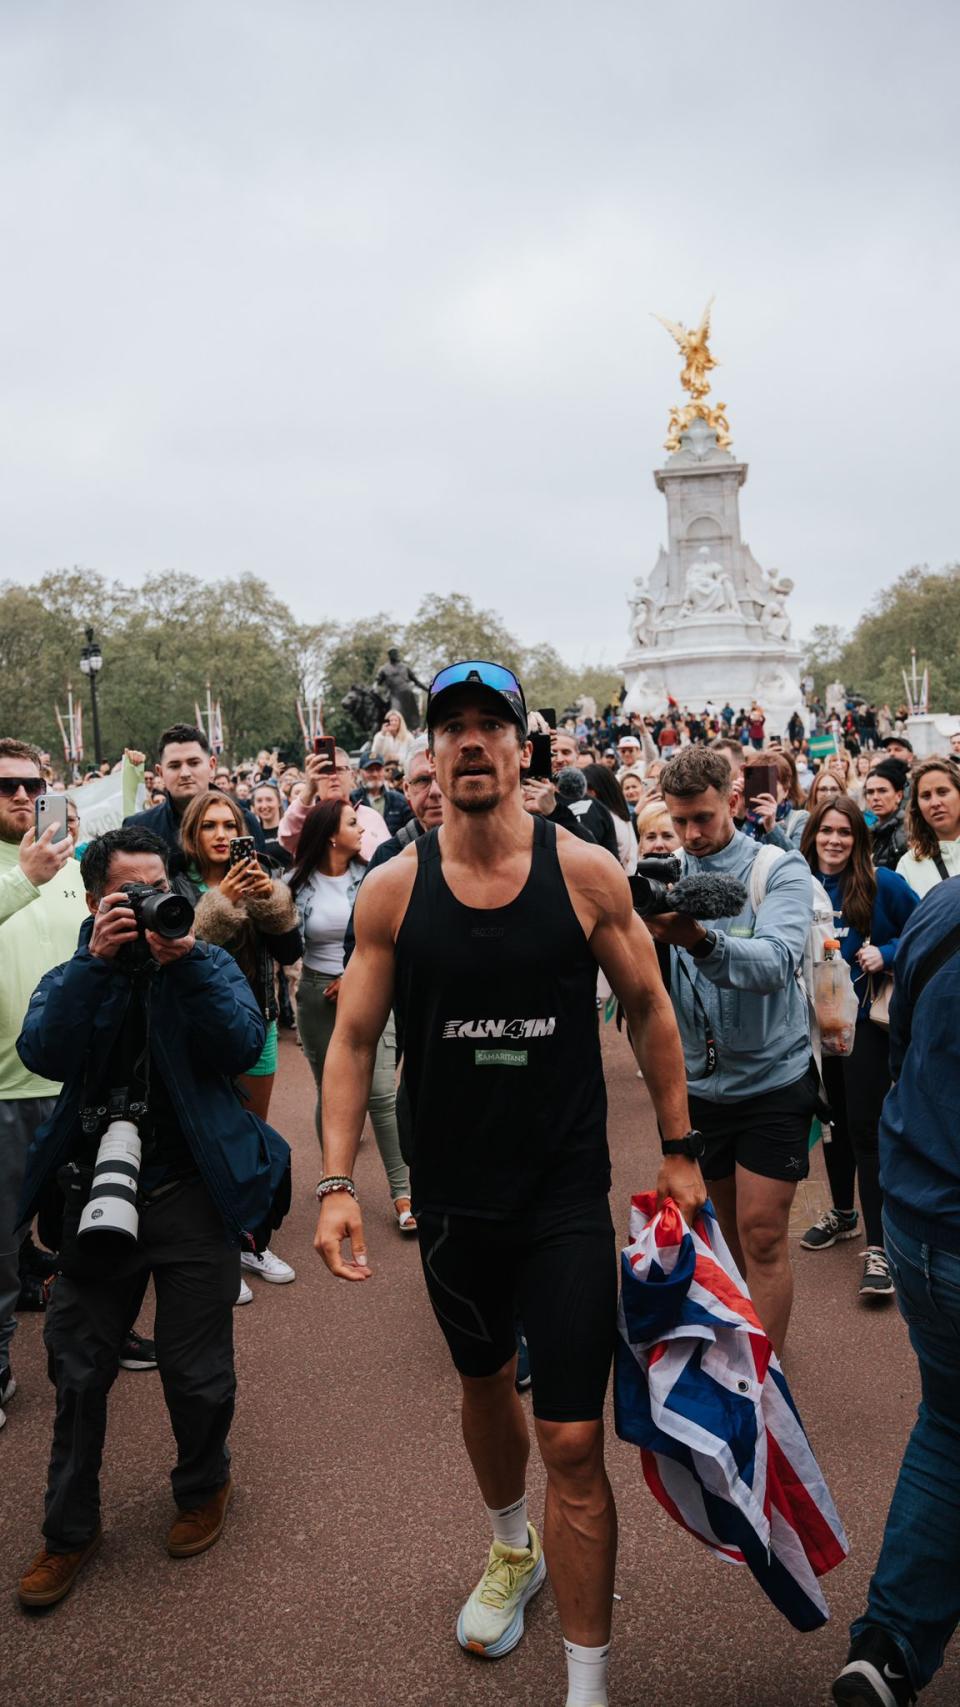 Joshua Patterson in London, after completing his 76th marathon last year. (Supplied)